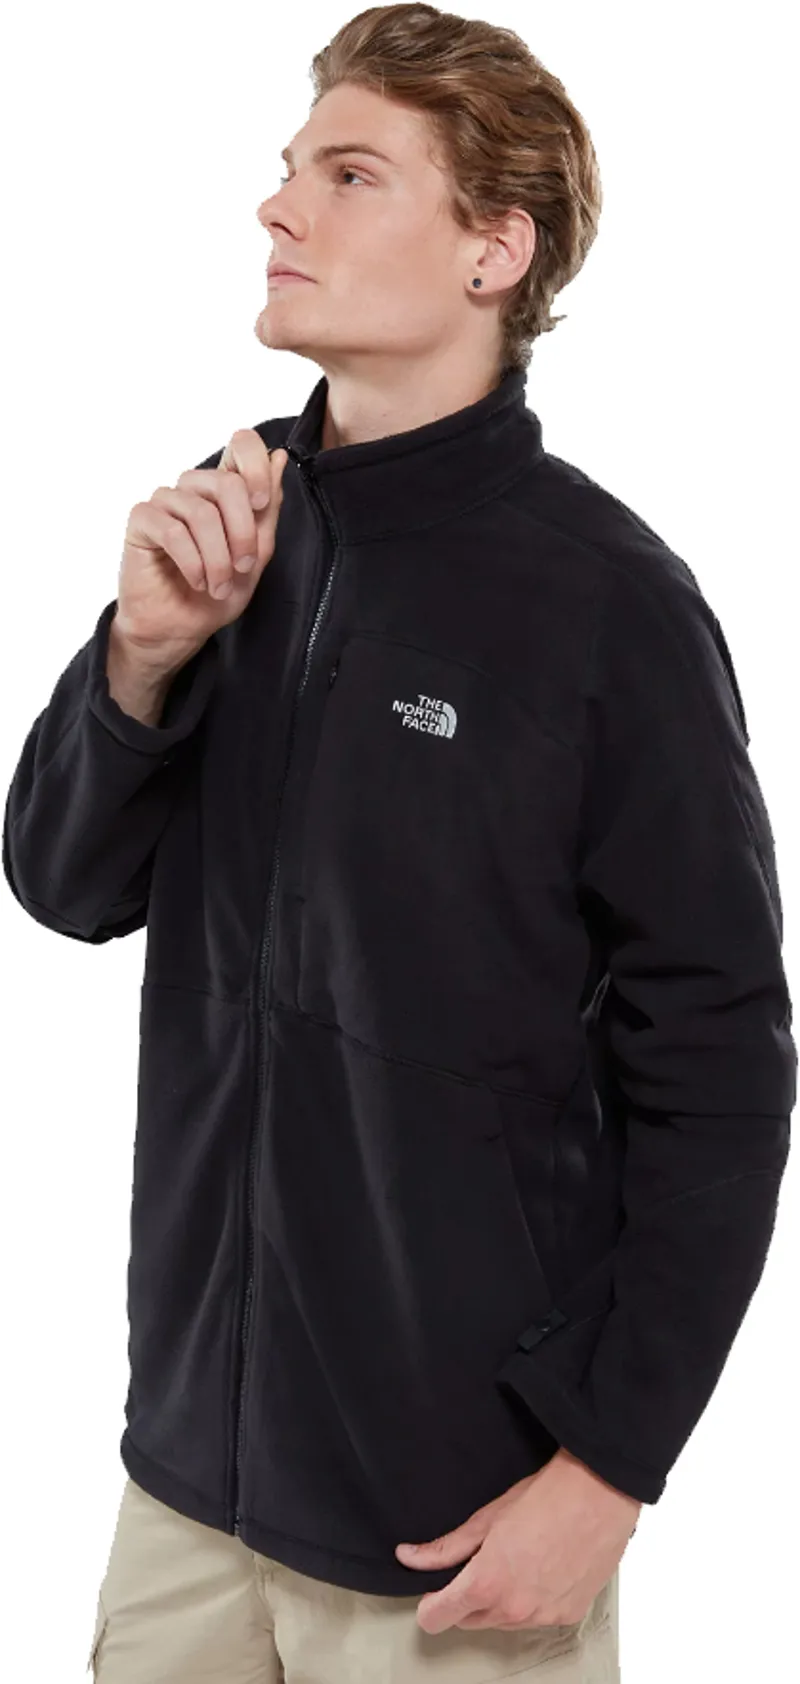 200 shadow the north face